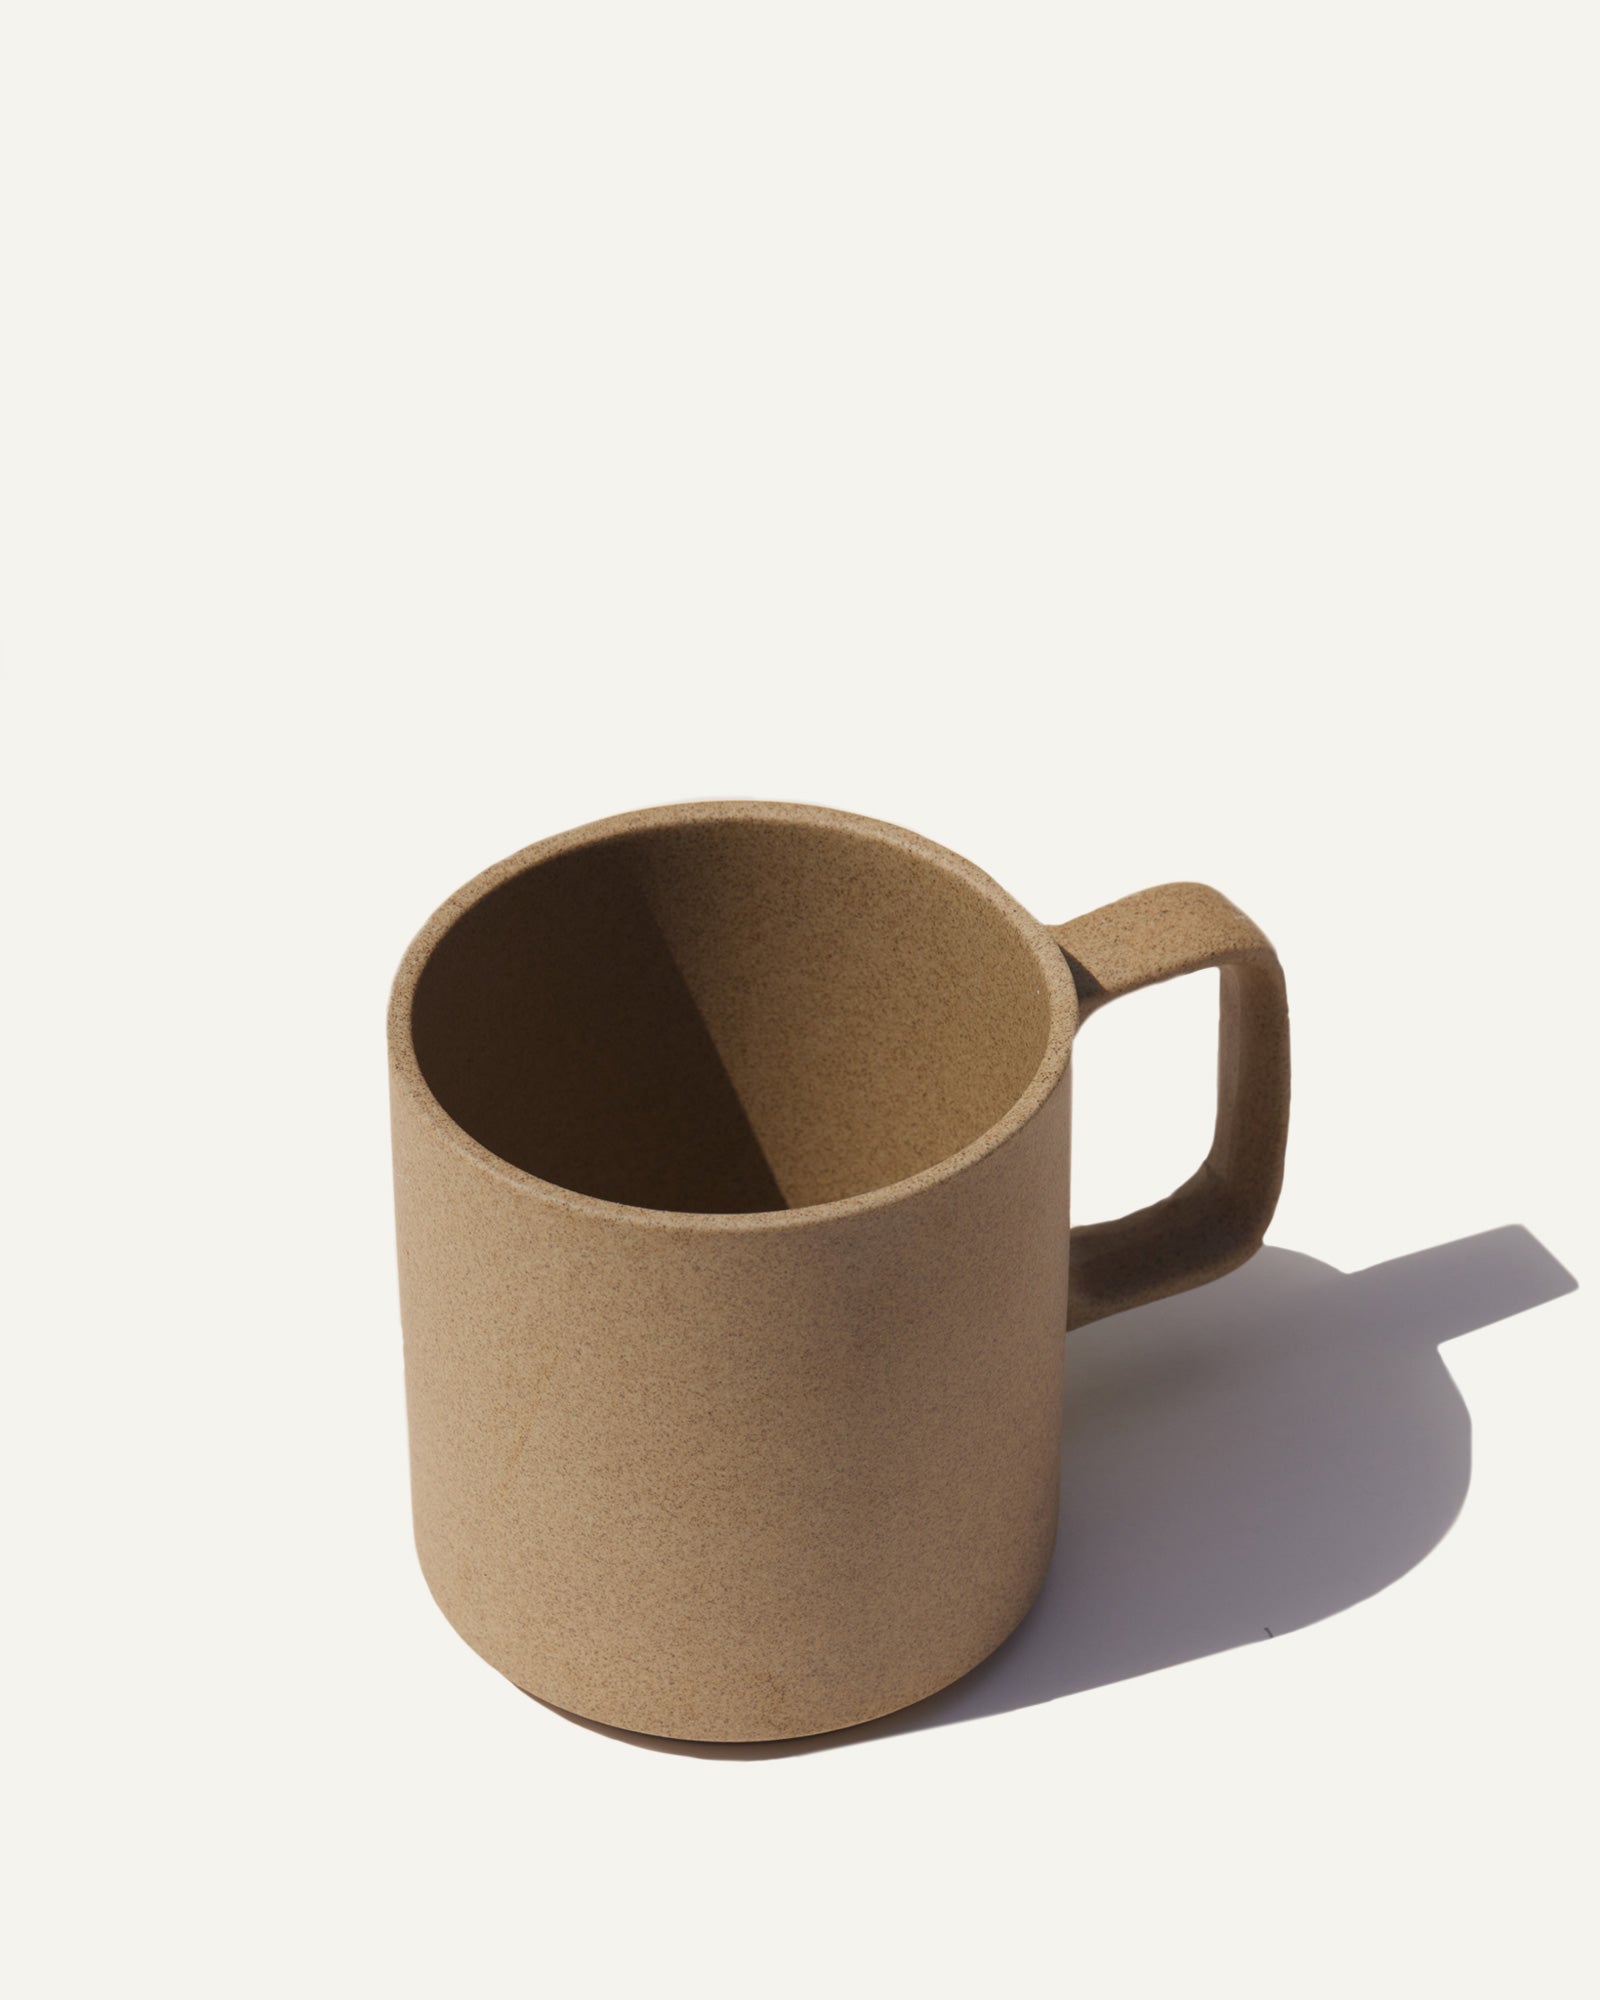 A natural colored ceramic mug from Hasami for Canyon Coffee